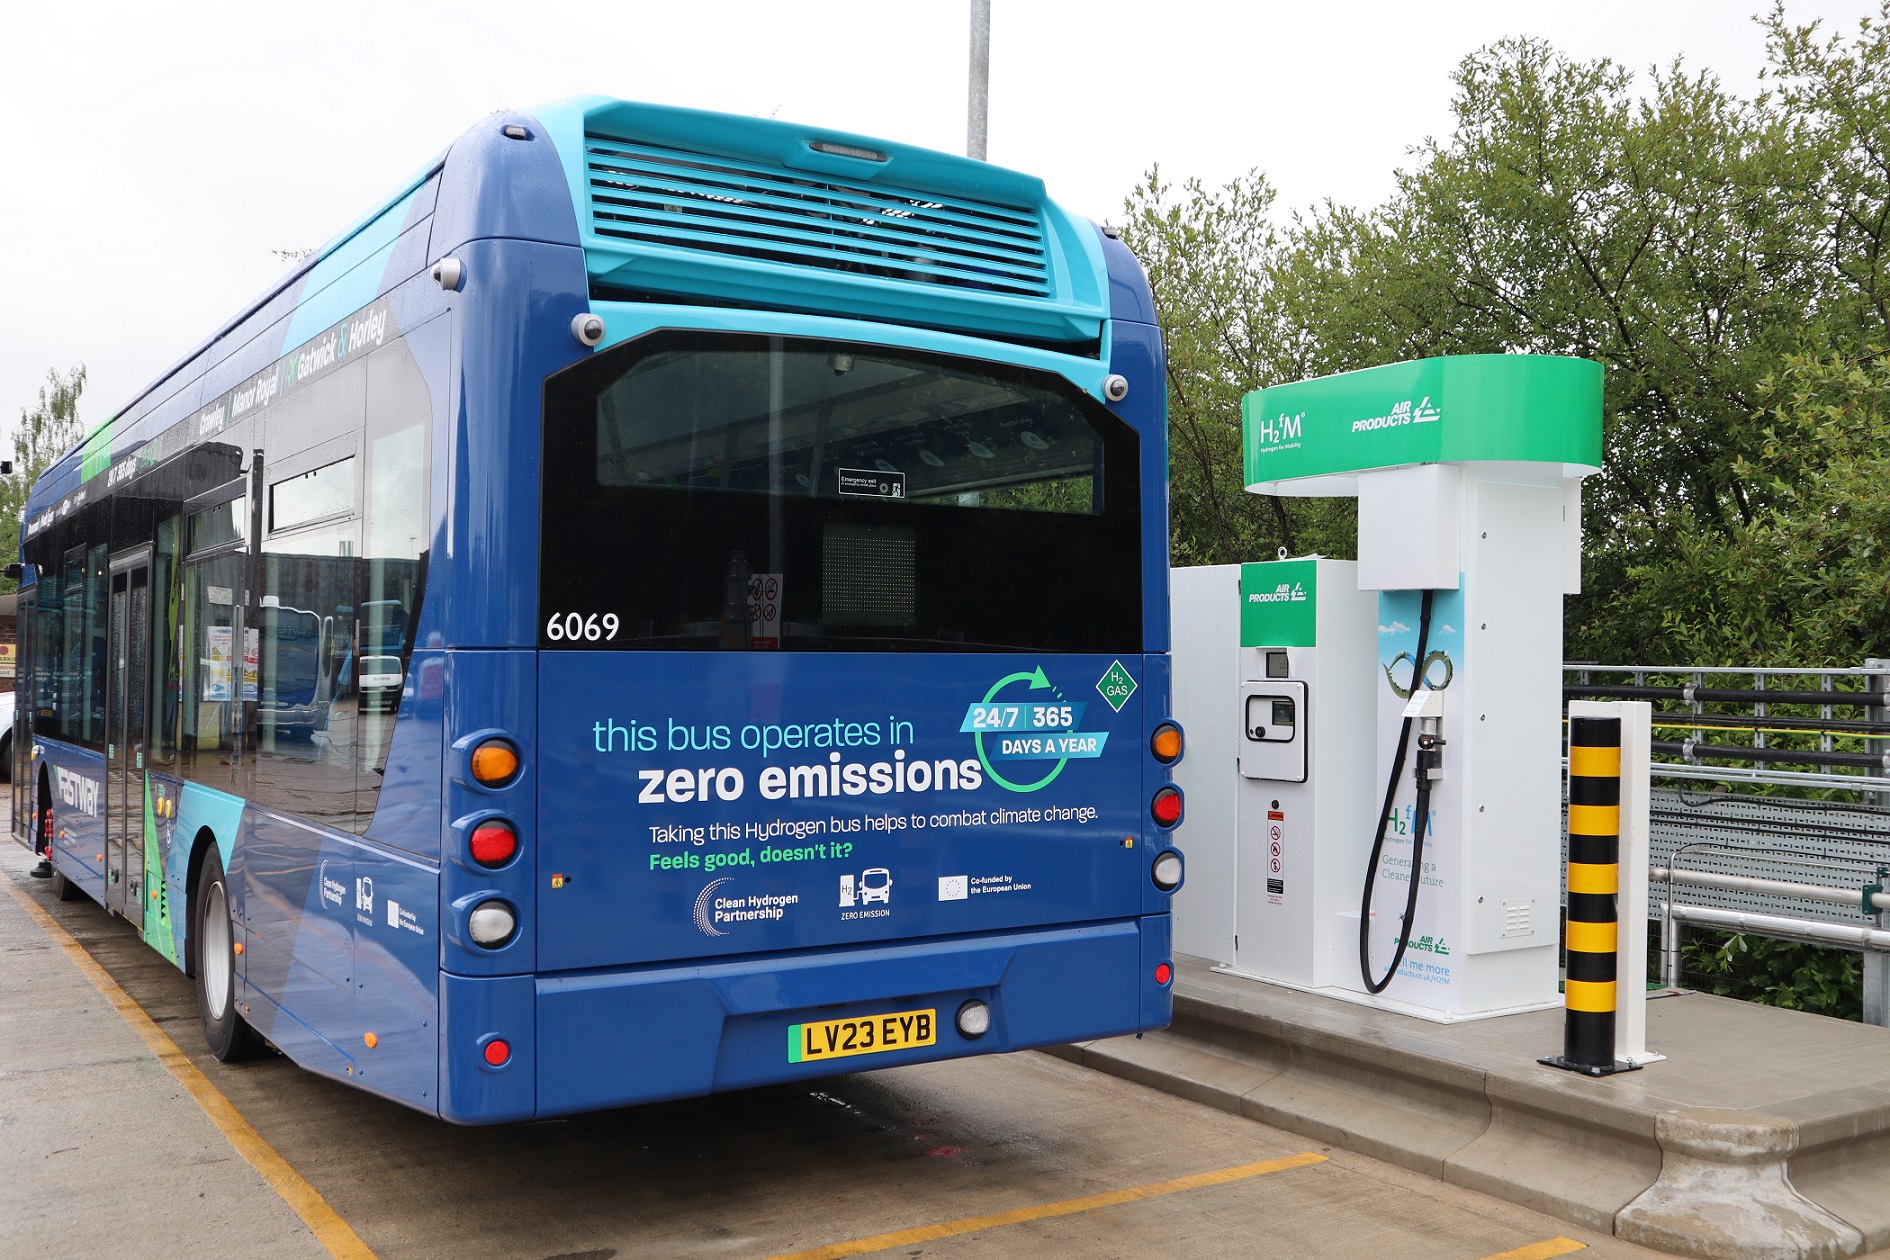 Franchising to act as catalyst for zero emission bus shift in Wales claims minister